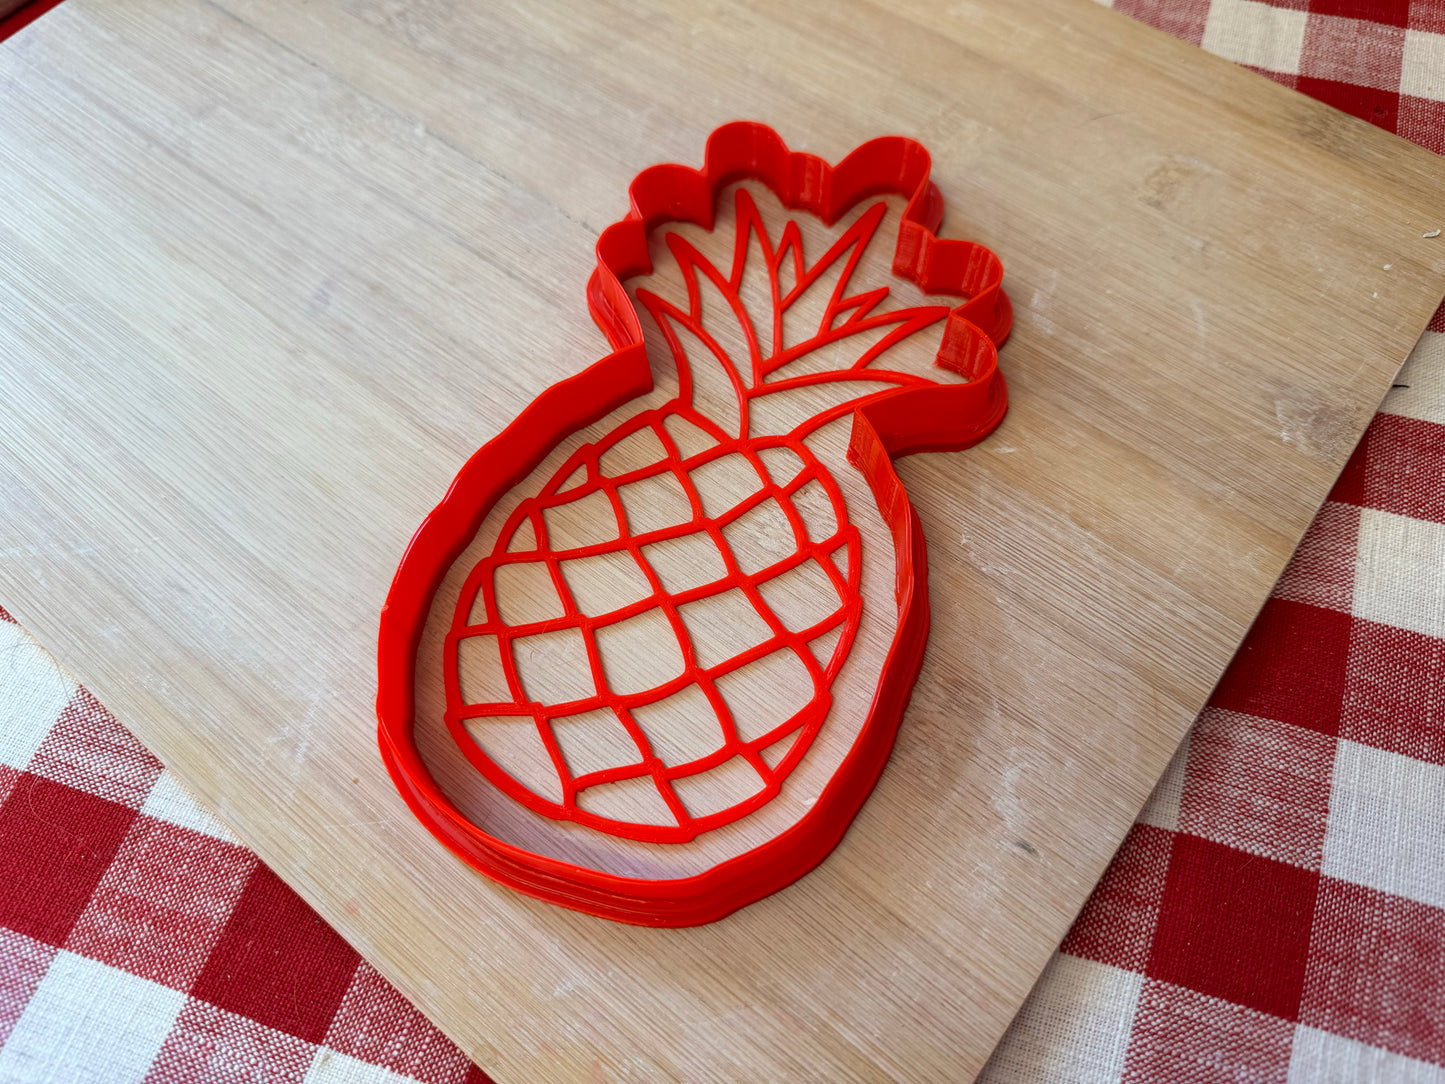 Pineapple Design Pottery Stamp or Stencil w/optional cutter - plastic 3d printed, multiple sizes available